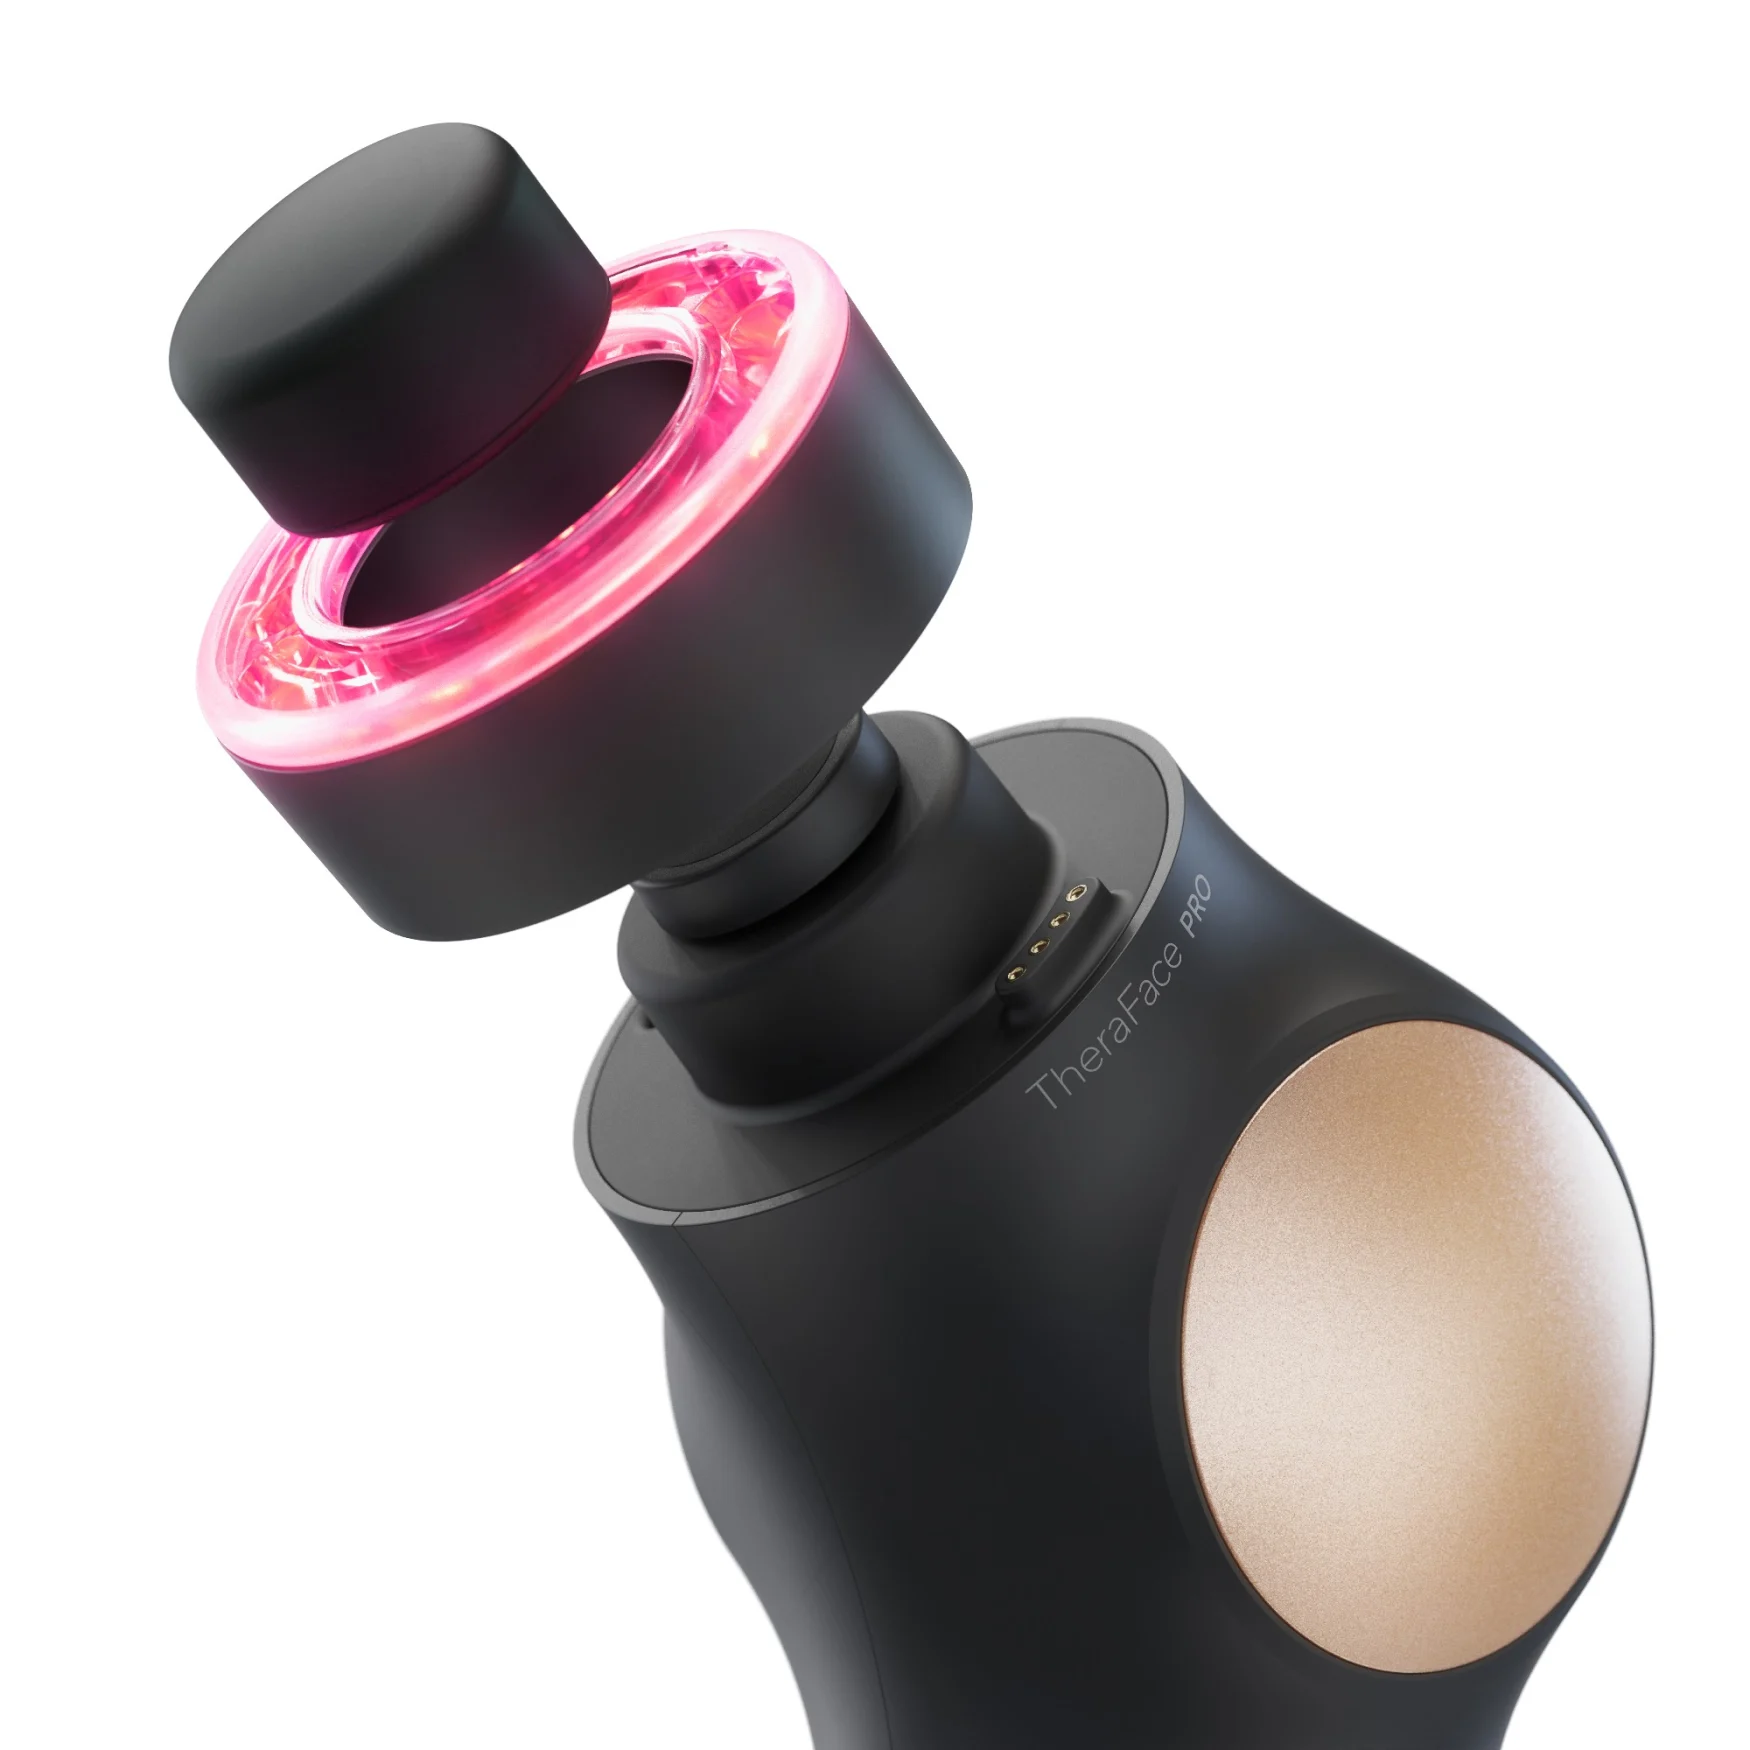 A close-up of the TheraFace Pro with the ring light attachment hovering over its motor.